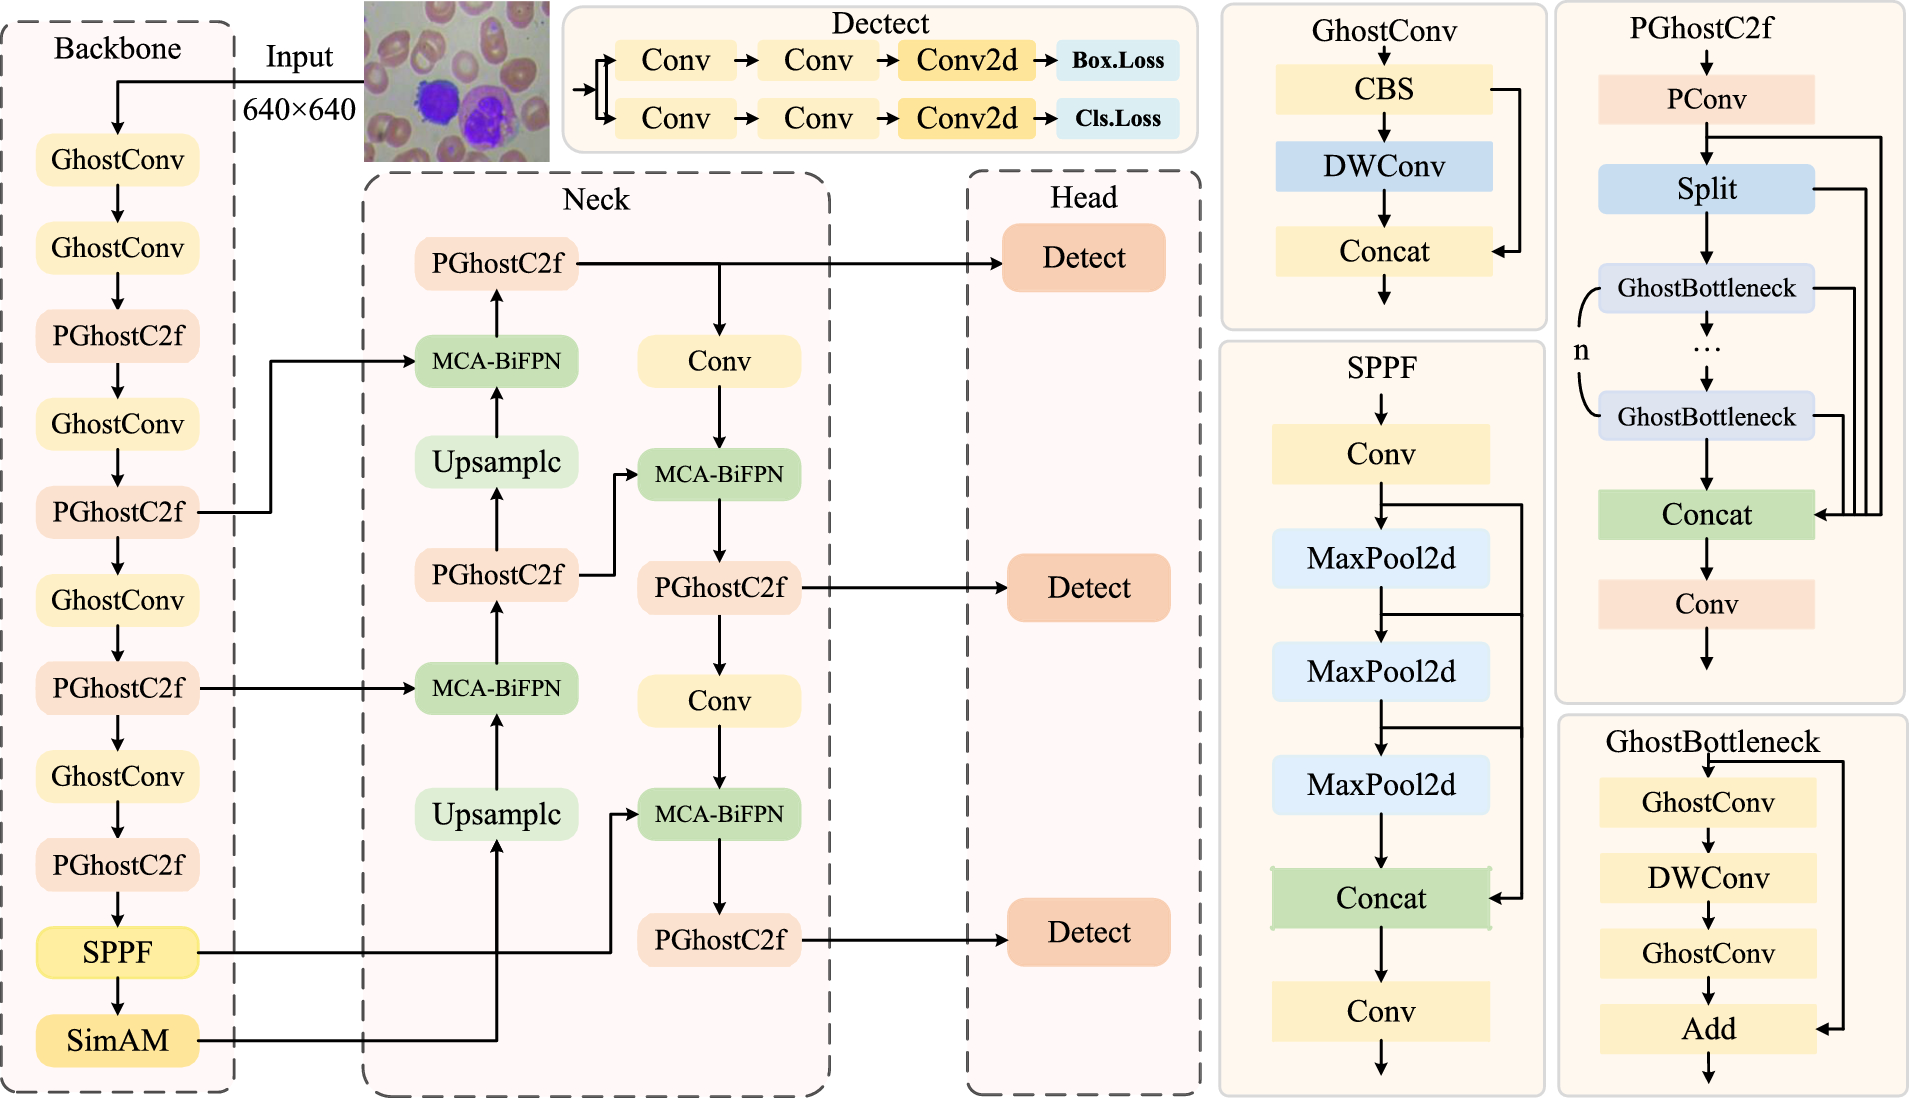 Gpmb-yolo: a lightweight model for efficient blood cell detection in medical imaging